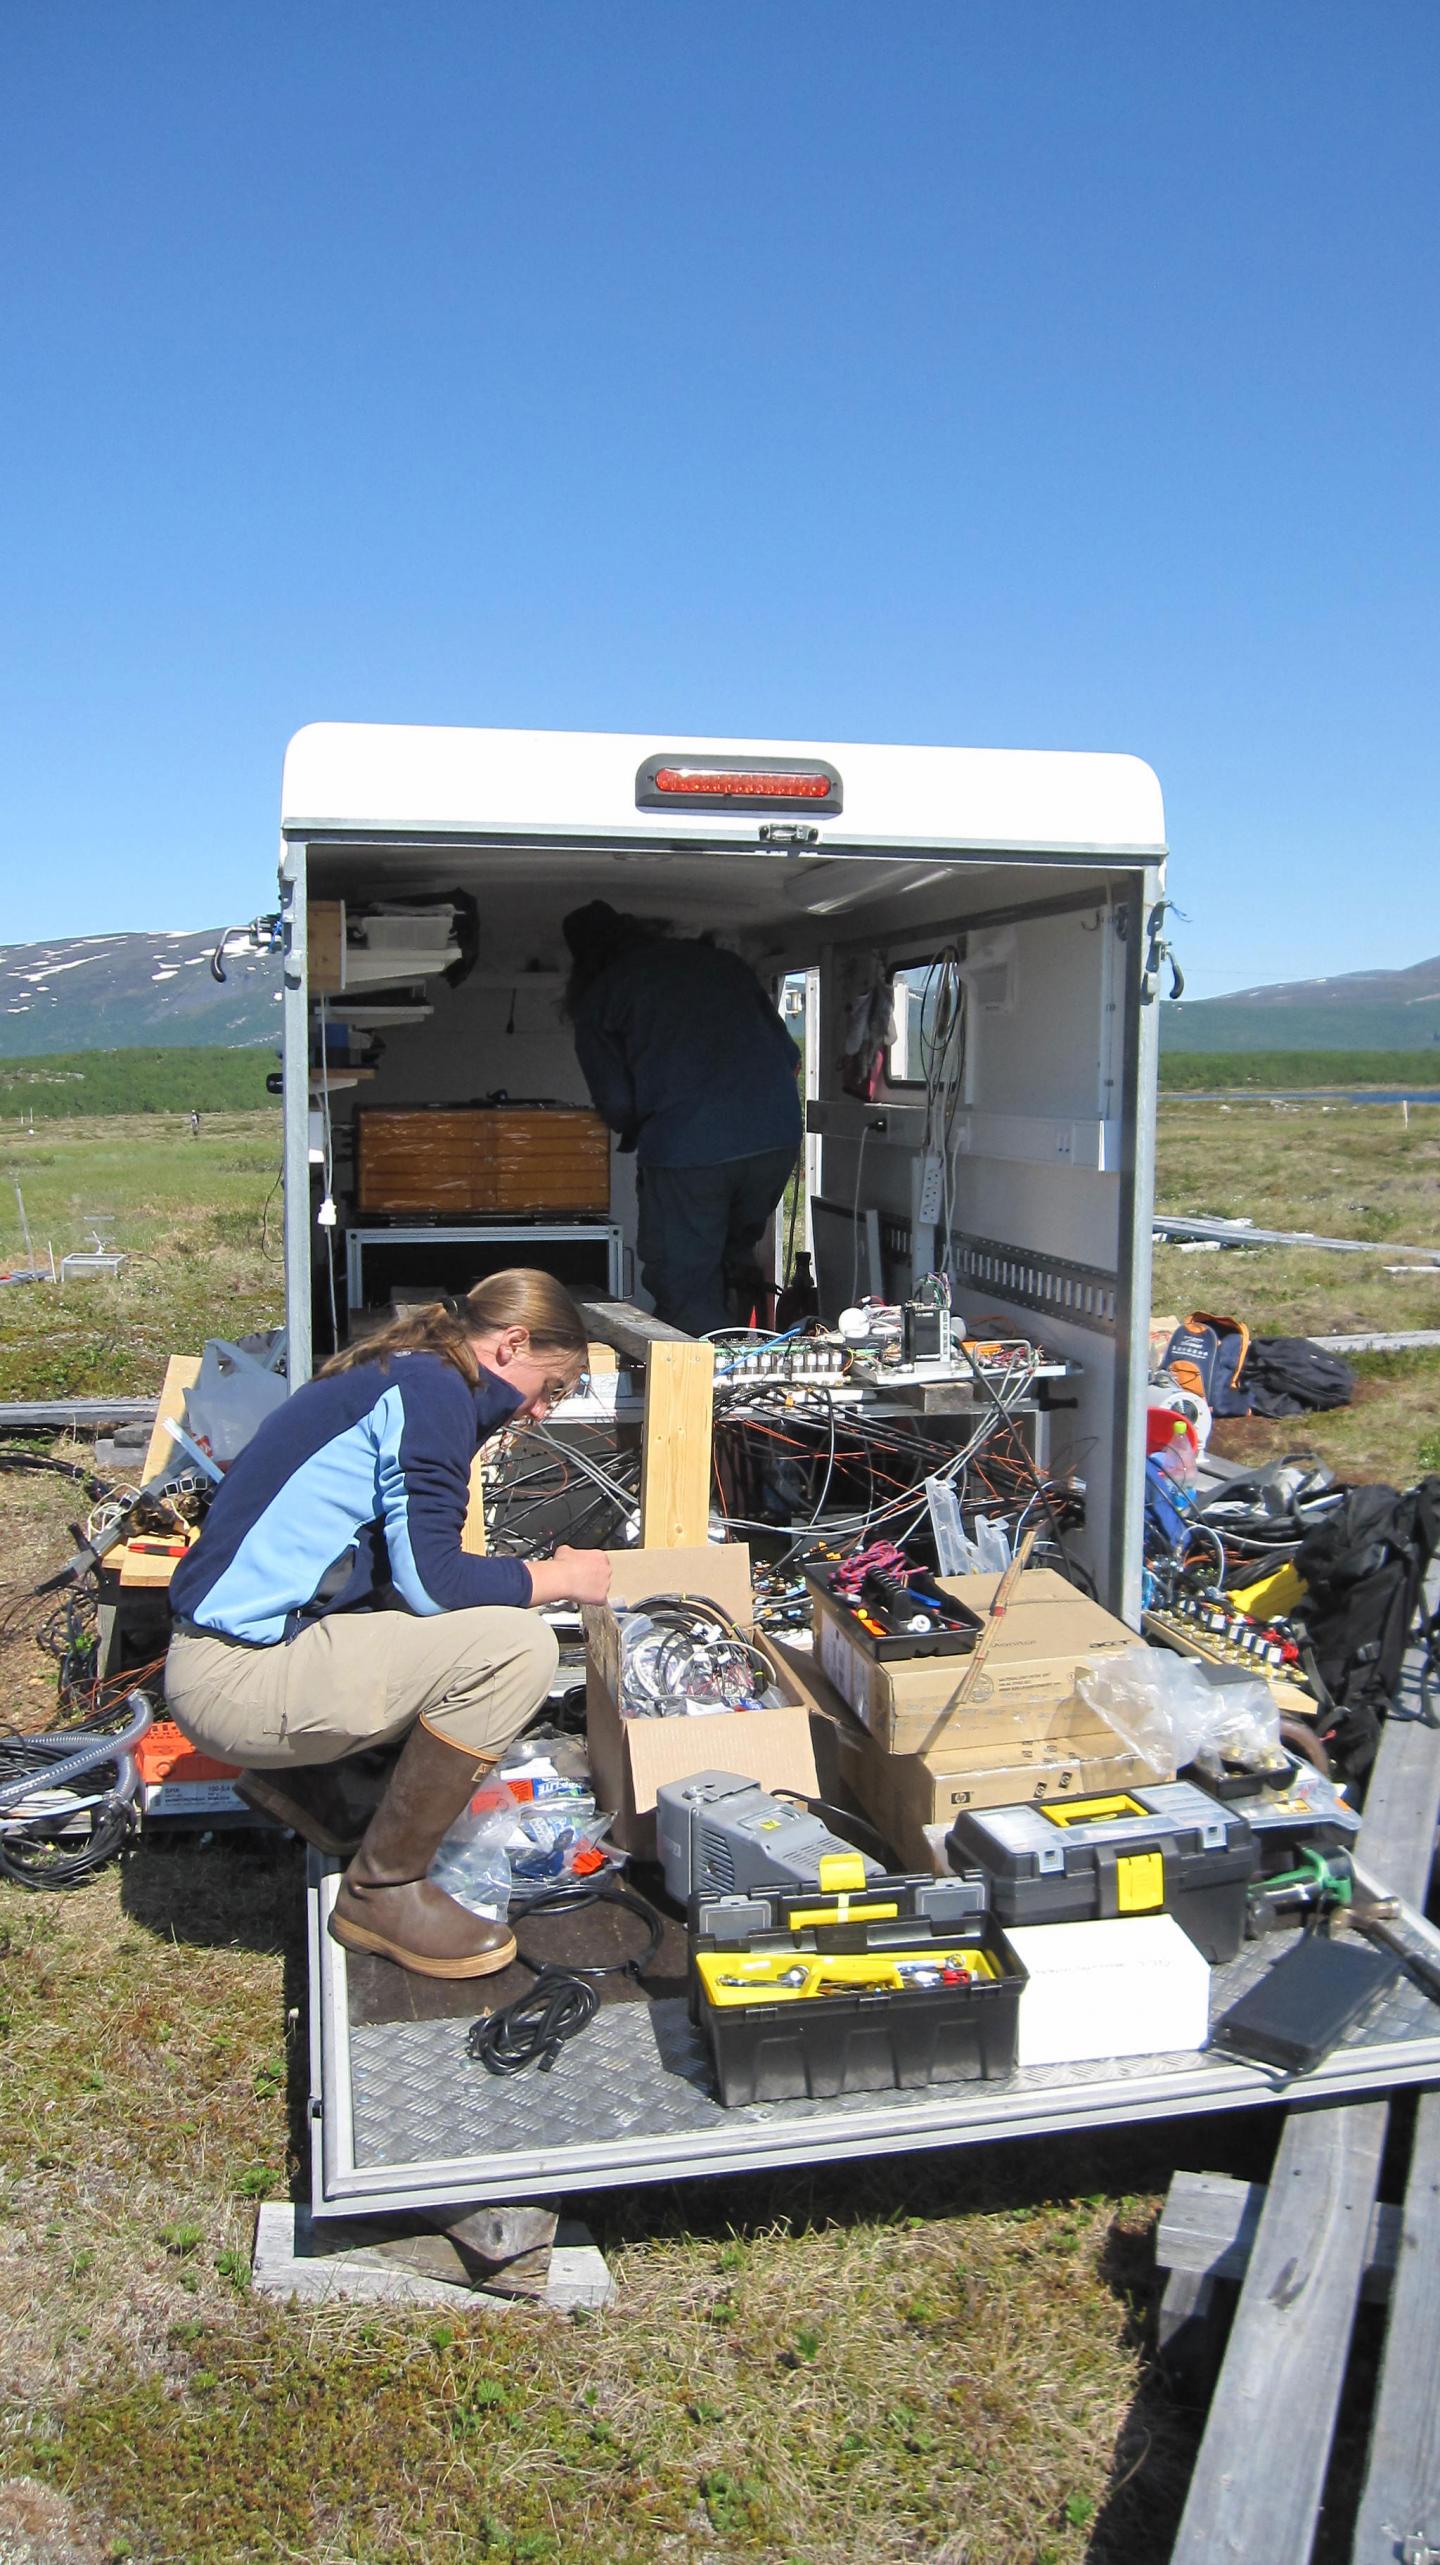 Installing Field Equipment at the Study Site